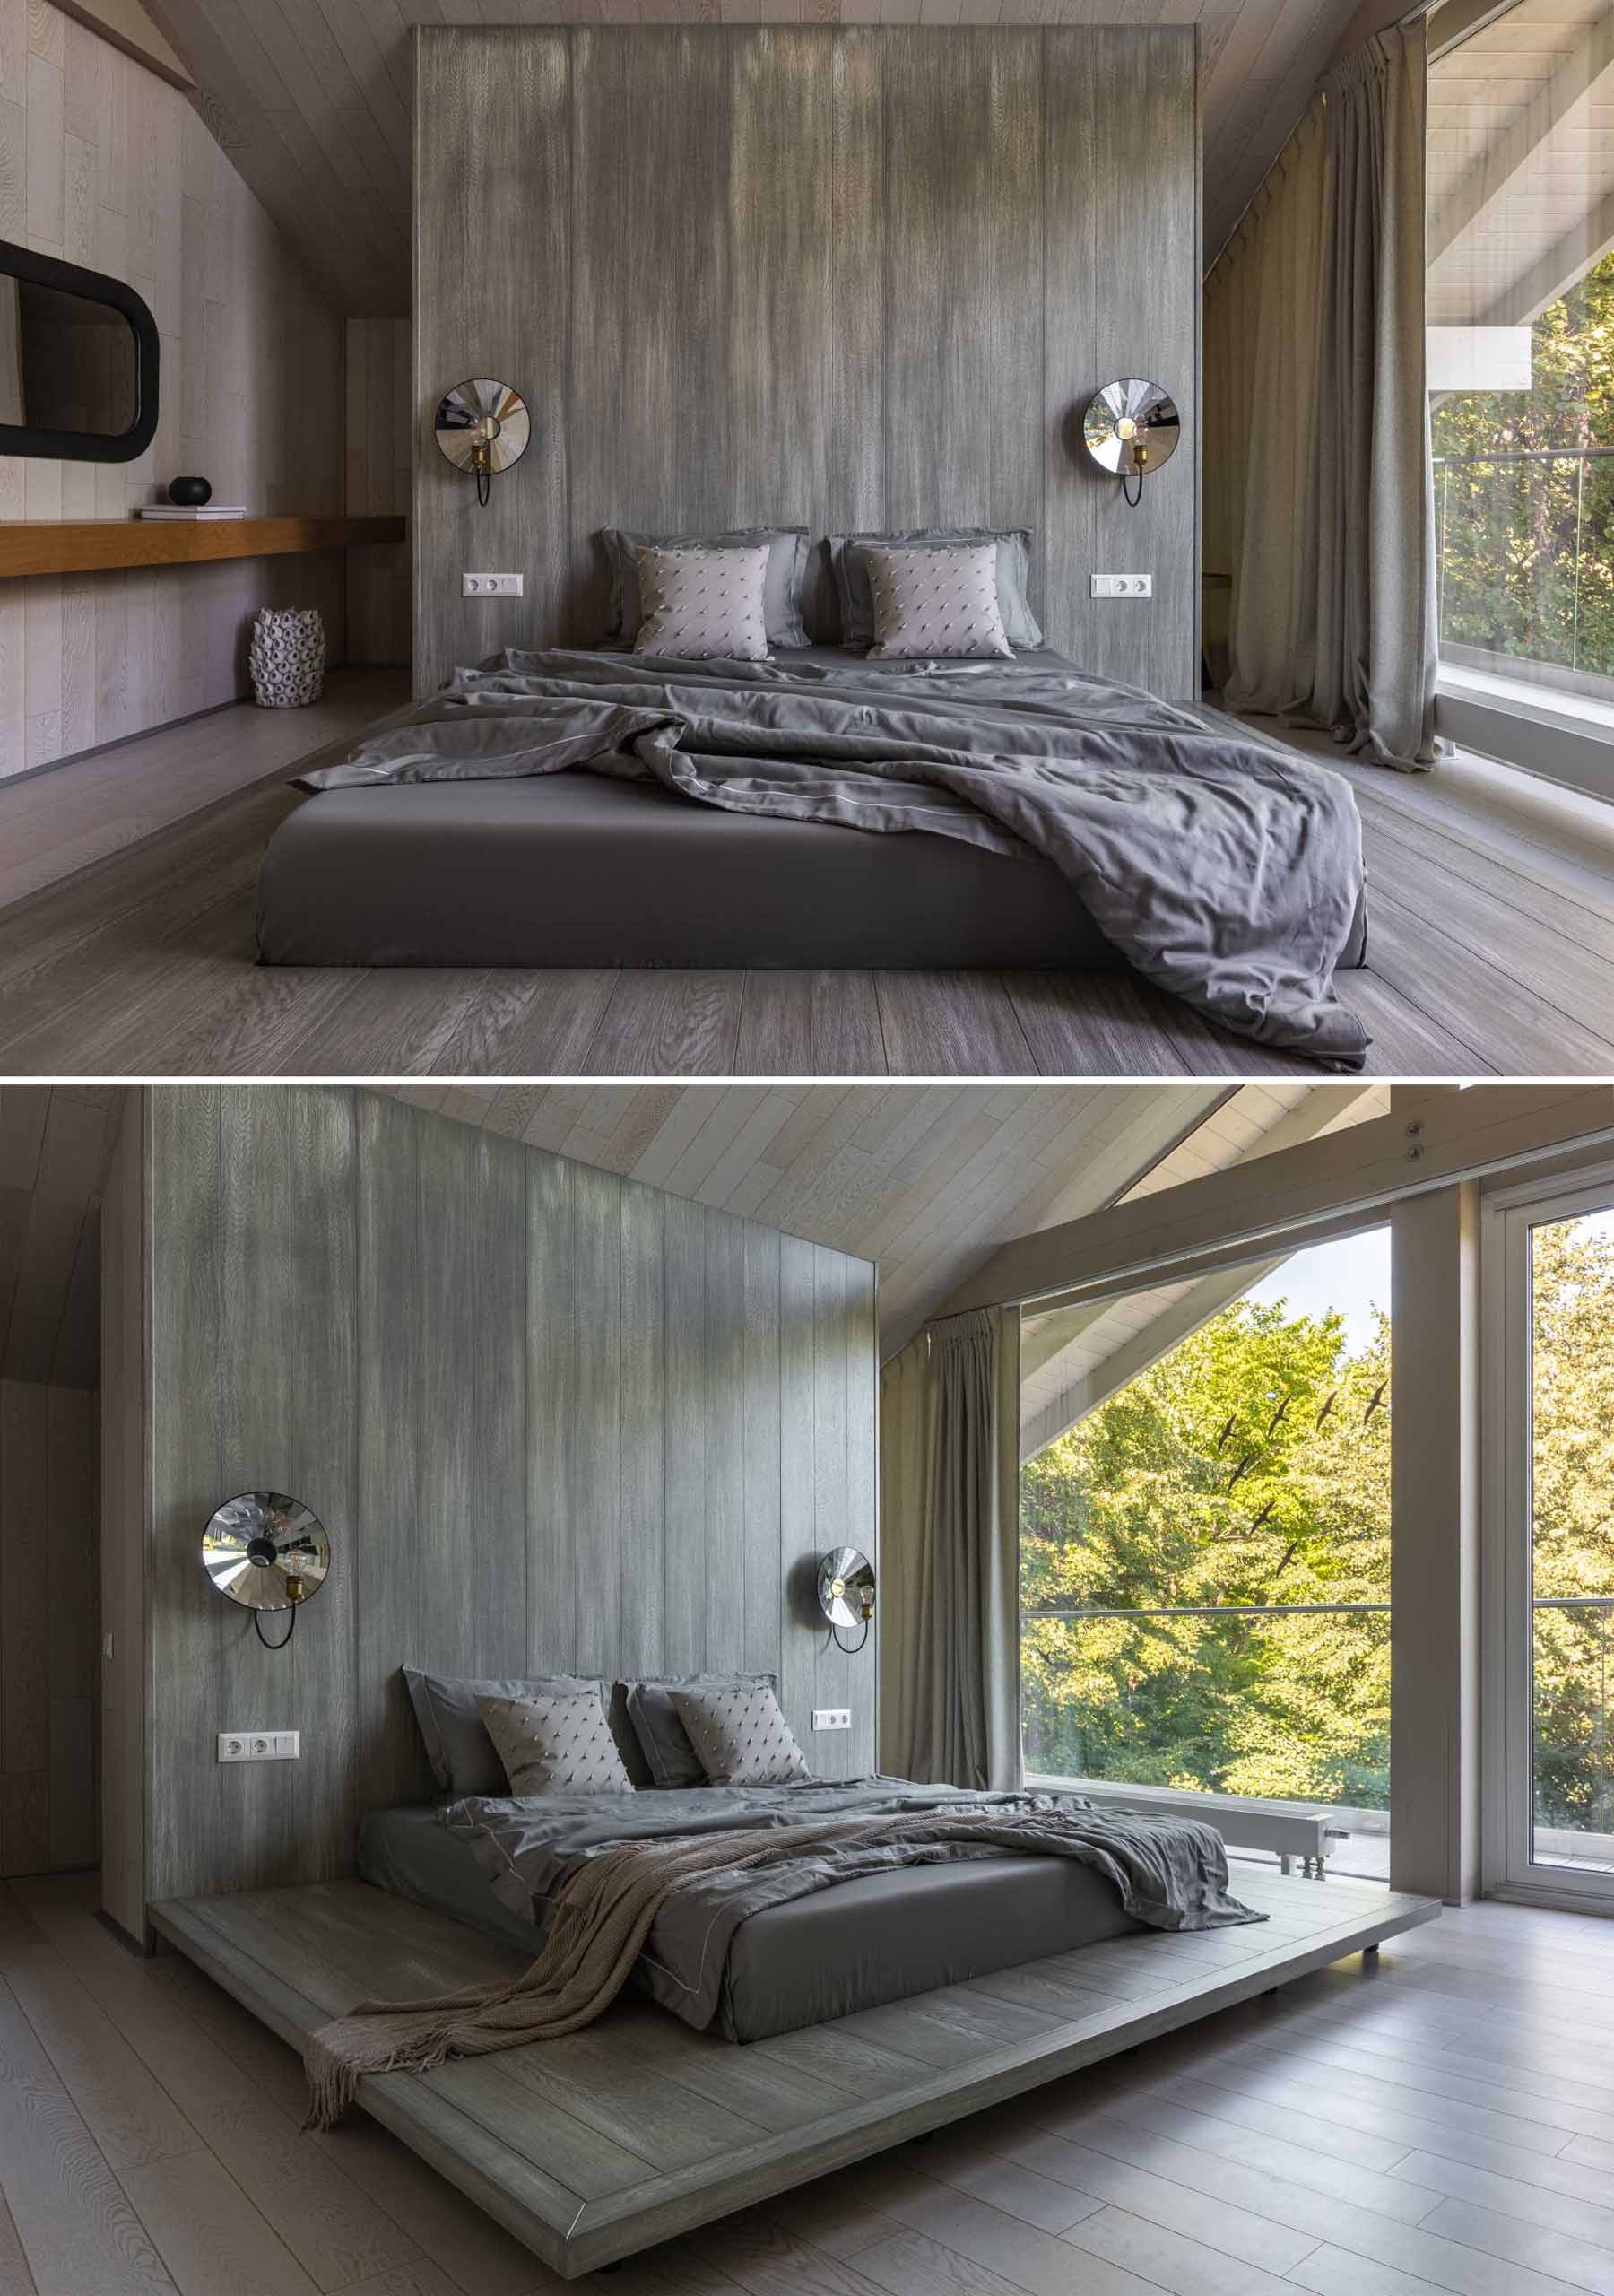 In this contemporary bedroom.,the grey color palette contrasts the lighter areas of the ،me, while floor-to-ceiling windows fill the room with ample natural light.